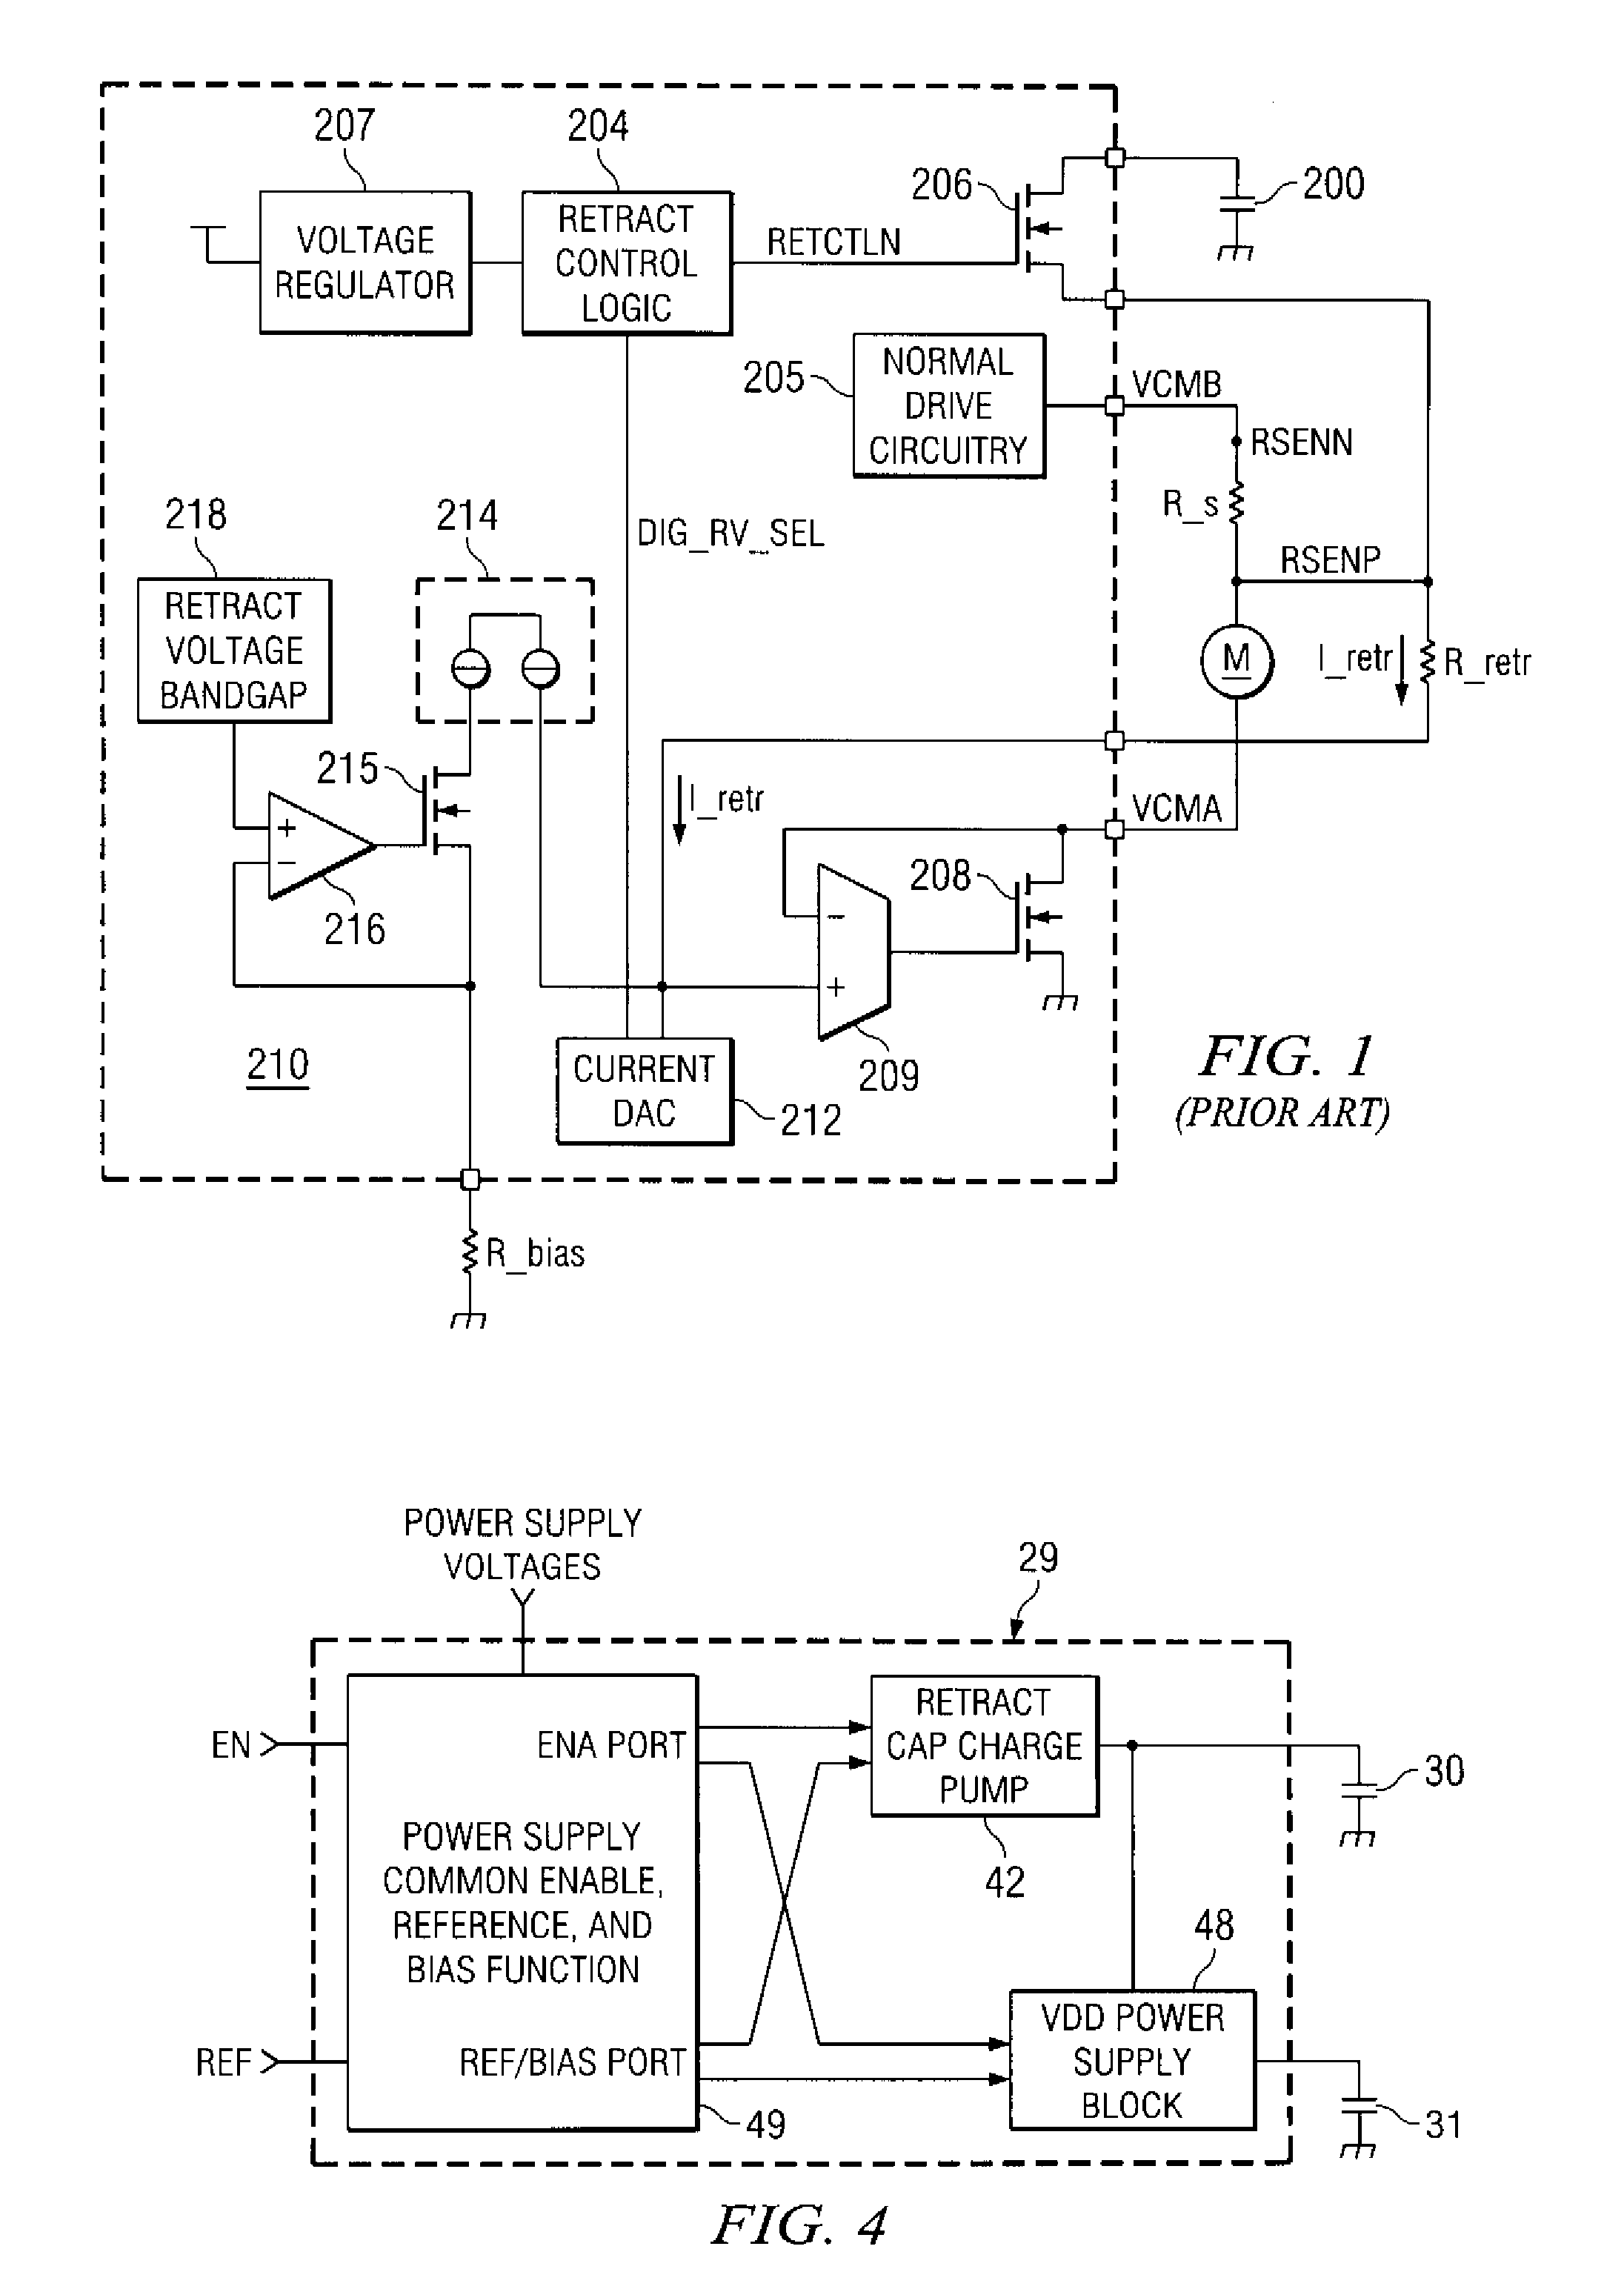 Programmable constant voltage retract of disk drive actuator